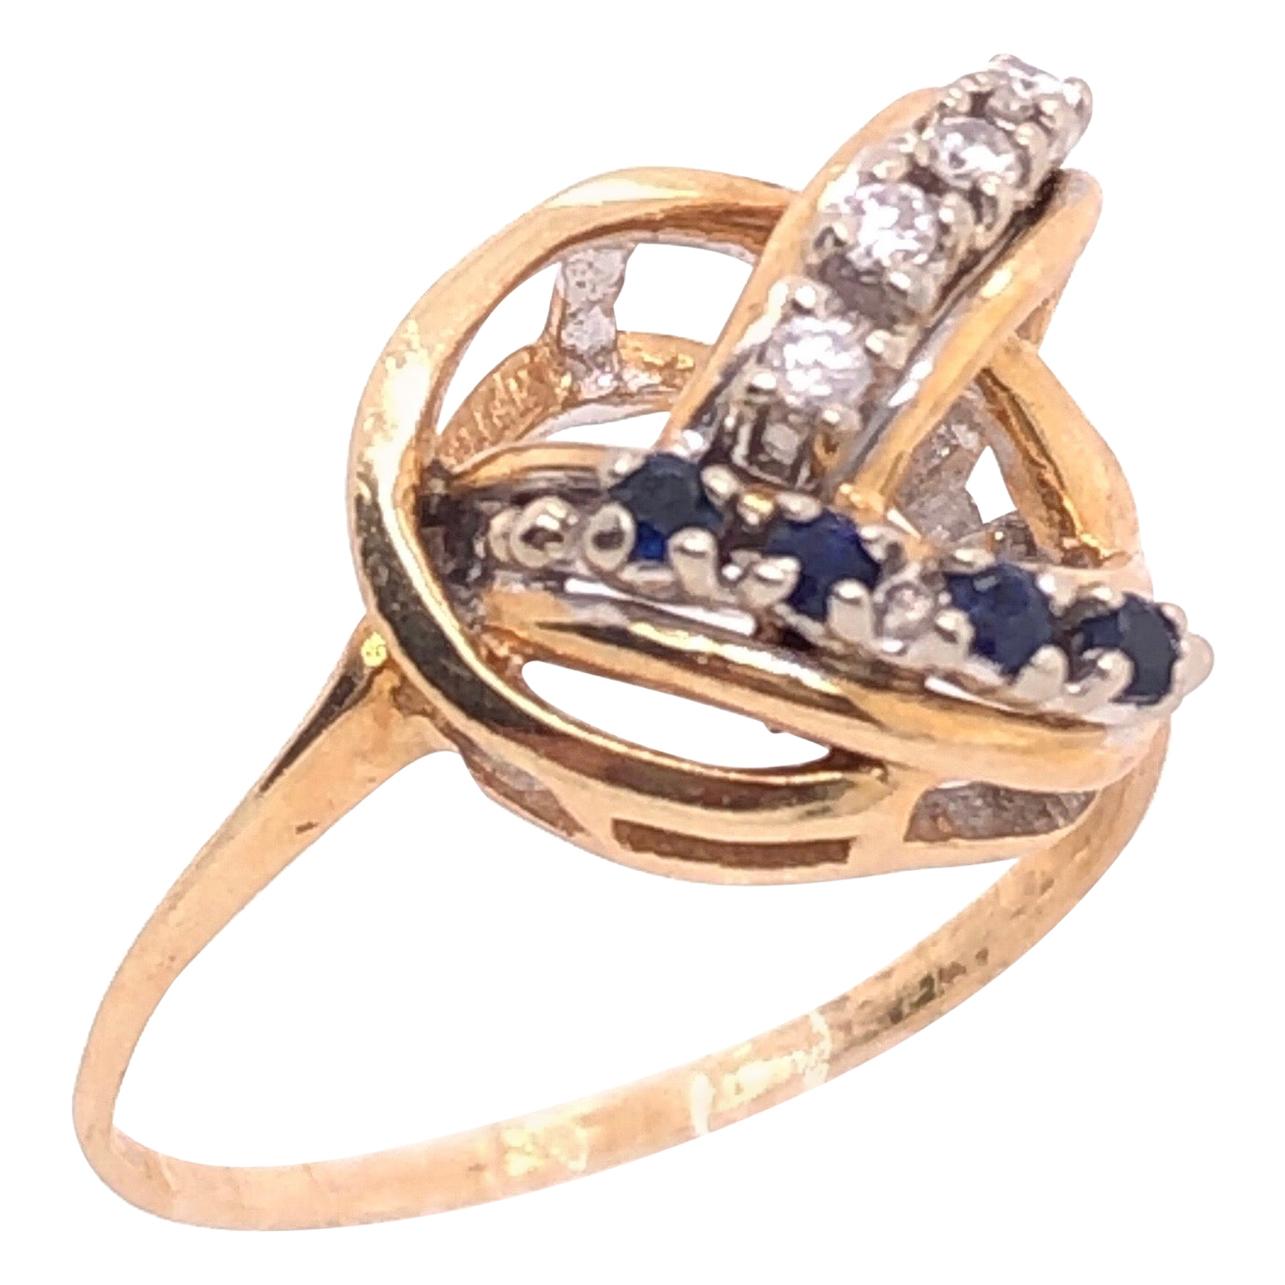 14 Karat Yellow and White Gold Freeform Ring with Sapphires and Diamonds